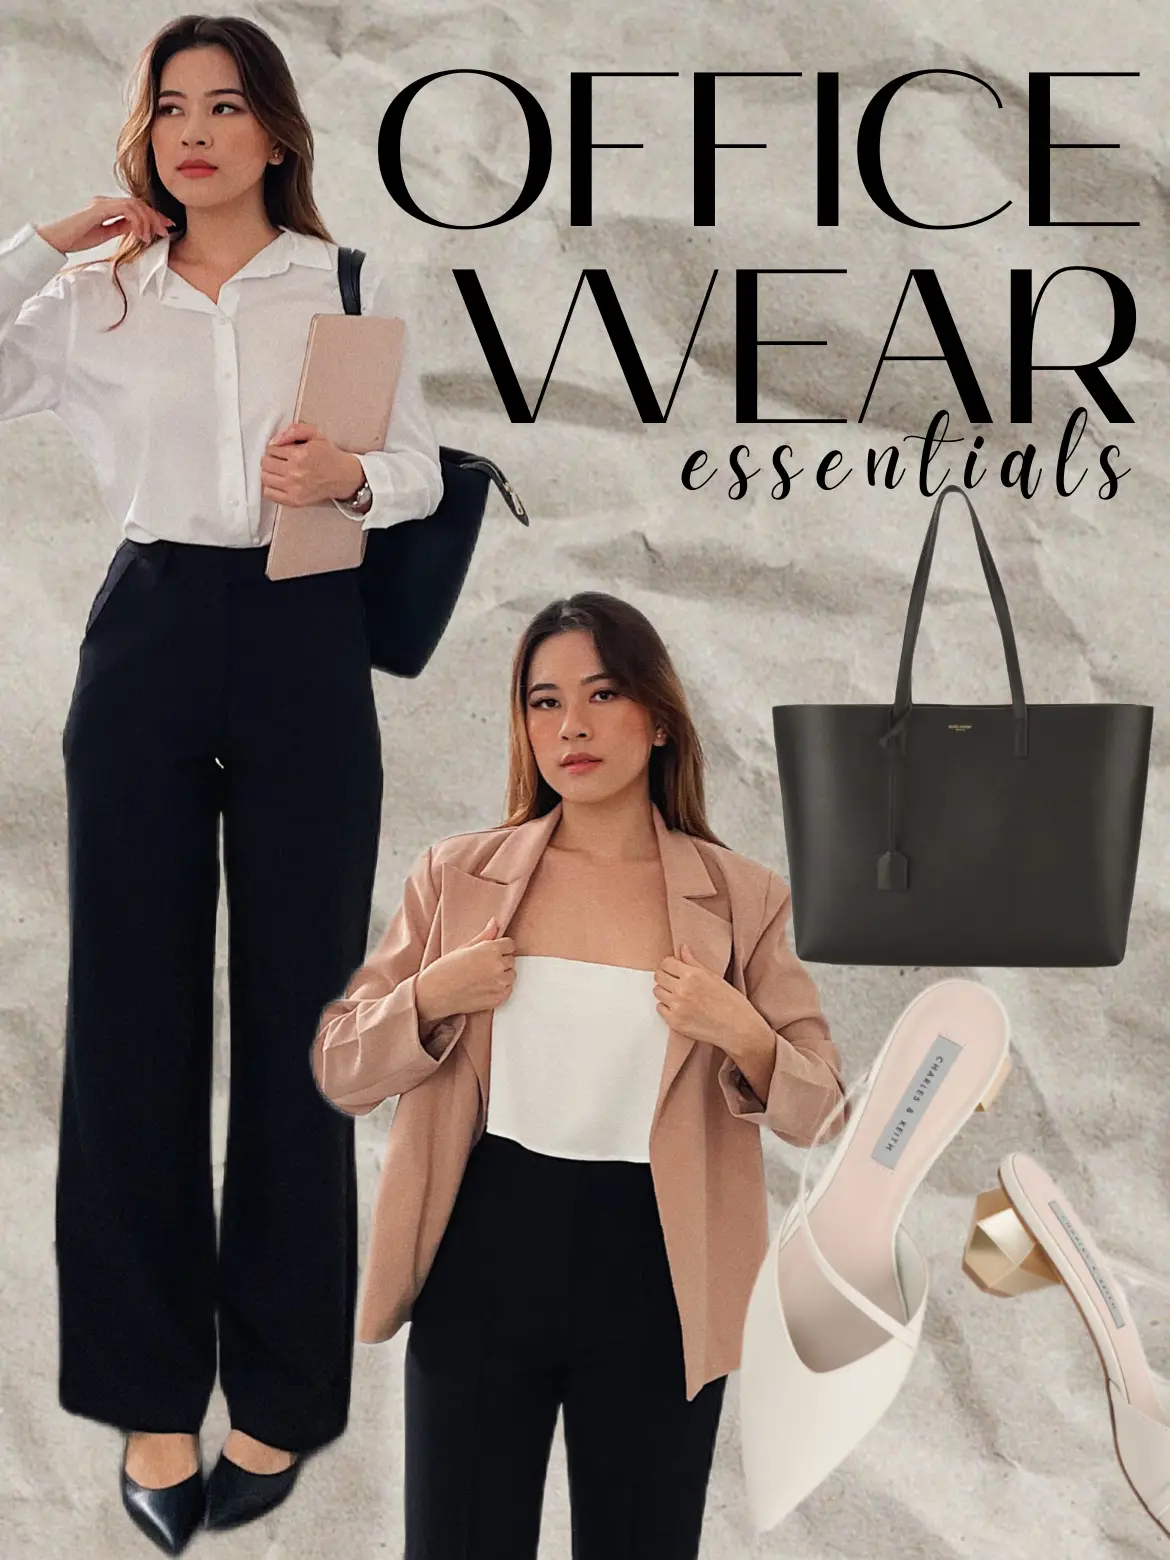 complete guide to work/intern wear essentials's images(0)